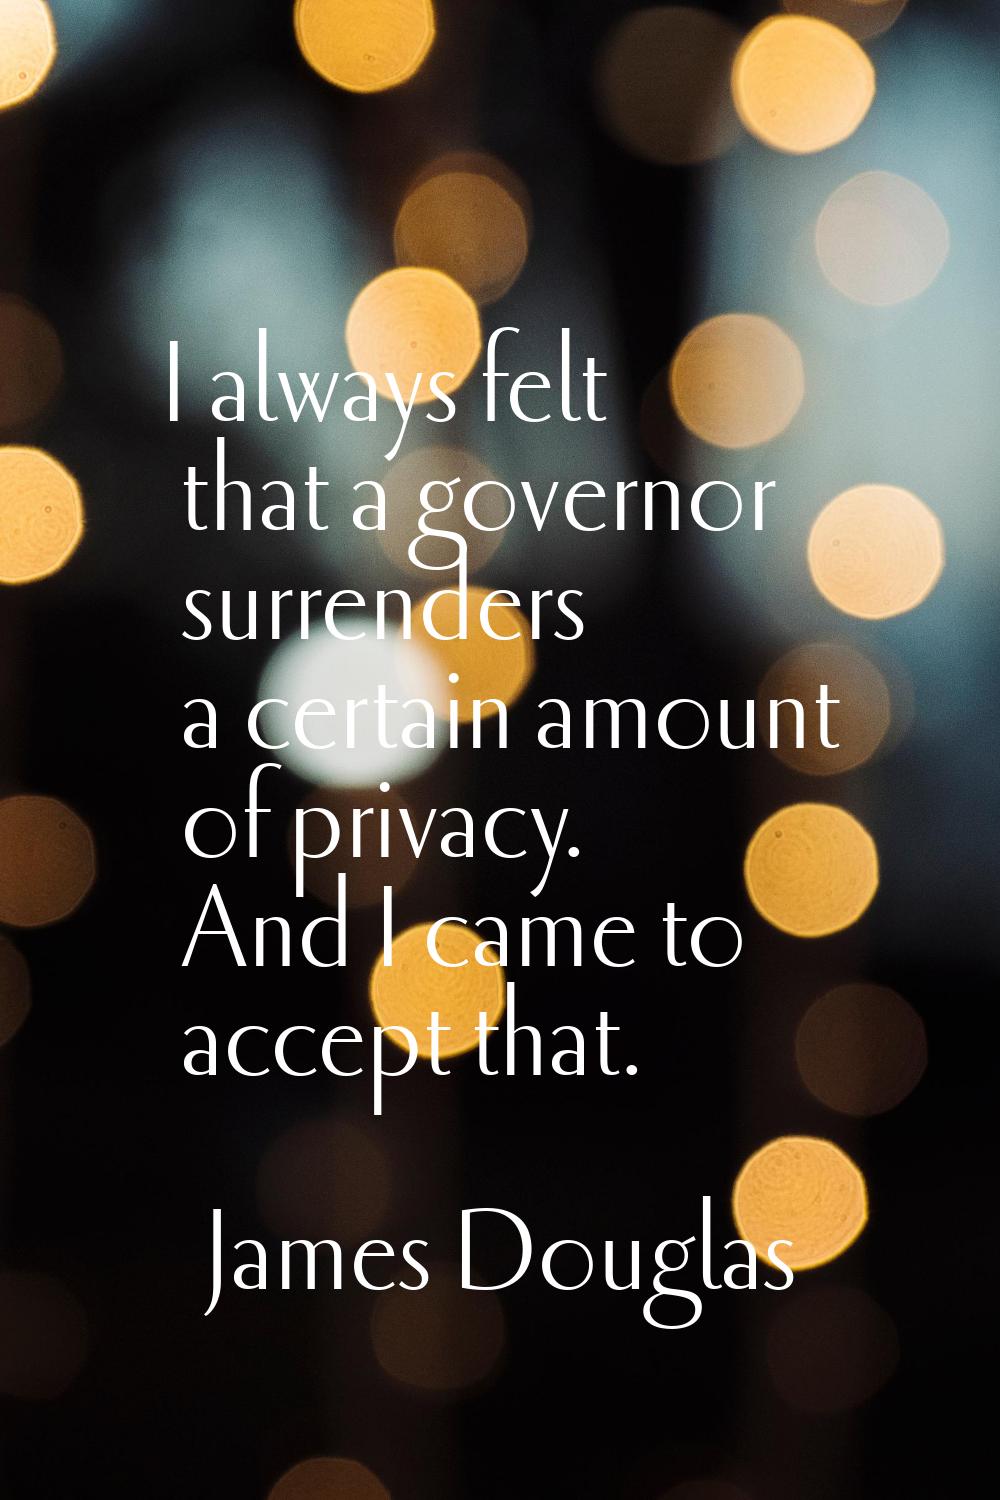 I always felt that a governor surrenders a certain amount of privacy. And I came to accept that.